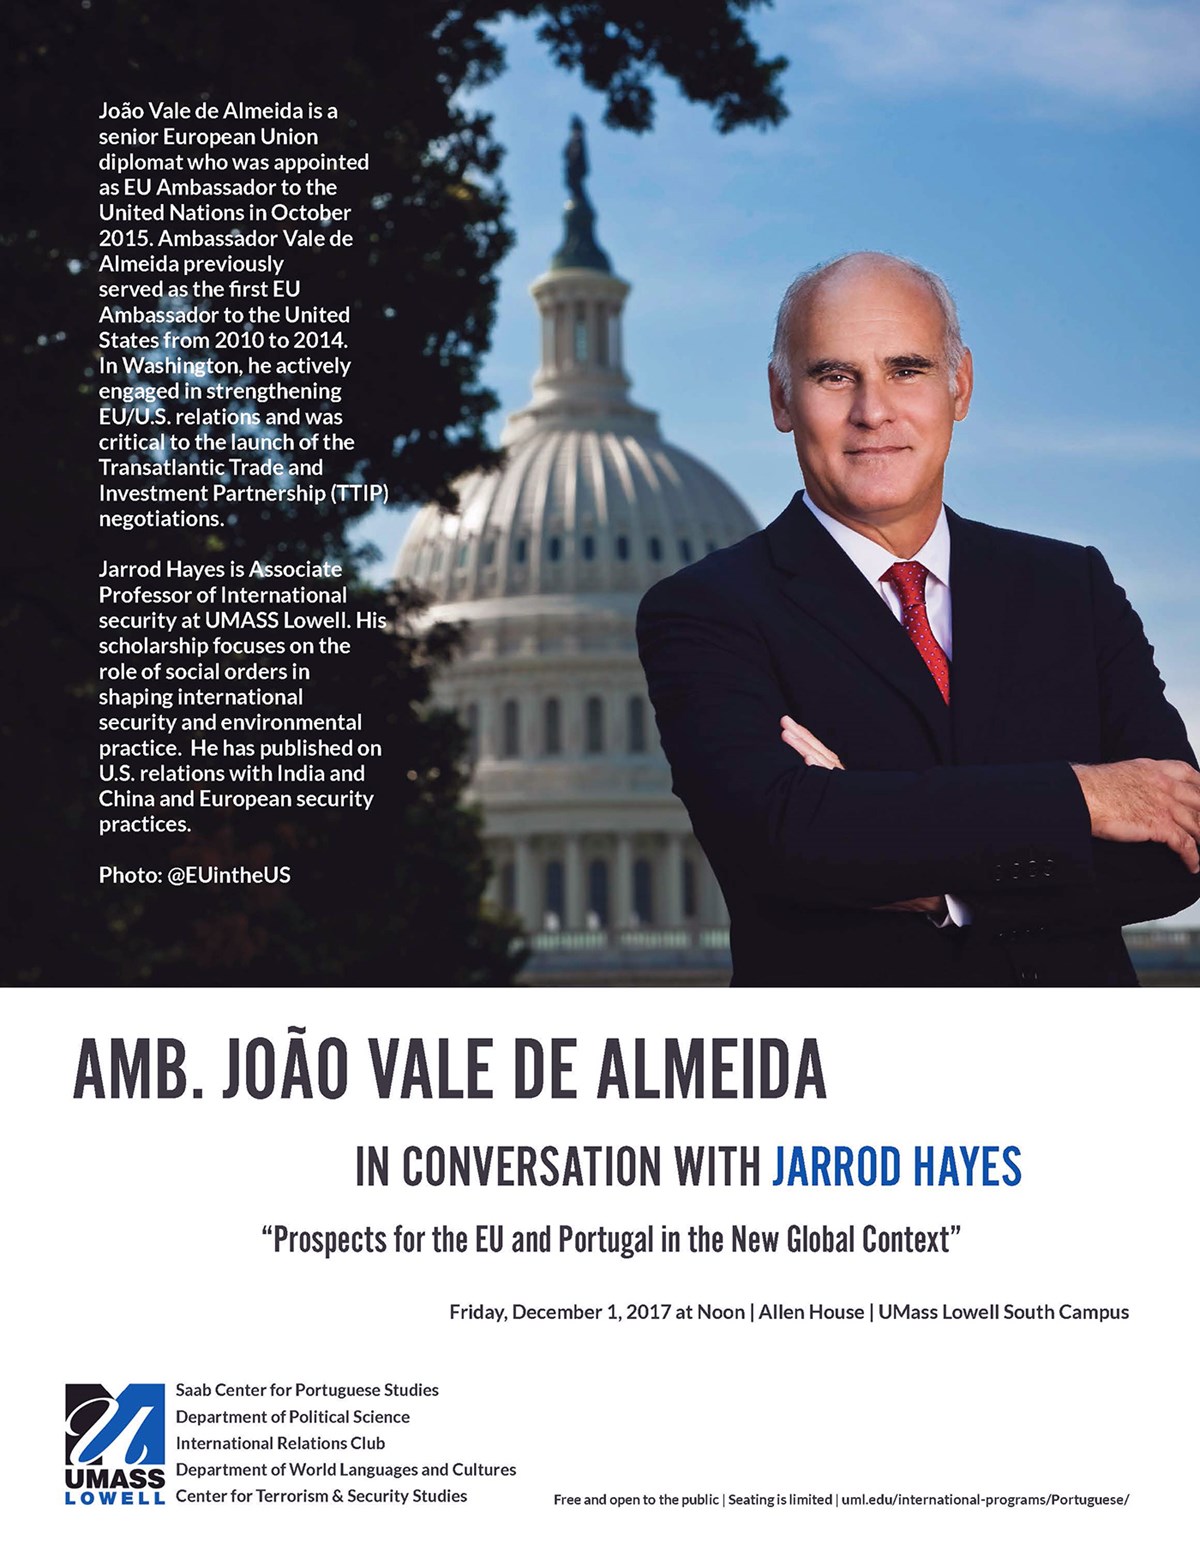 Flyer for Ambassador João Vale de Almeida In IN CONVERSATION WITH JARROD HAYES "Prospects for the EU and Portugal in the New Global Context” When: Friday, December 1, 2017 at Noon  Where: O’Leary Library Mezzanine, UMass Lowell South Campus